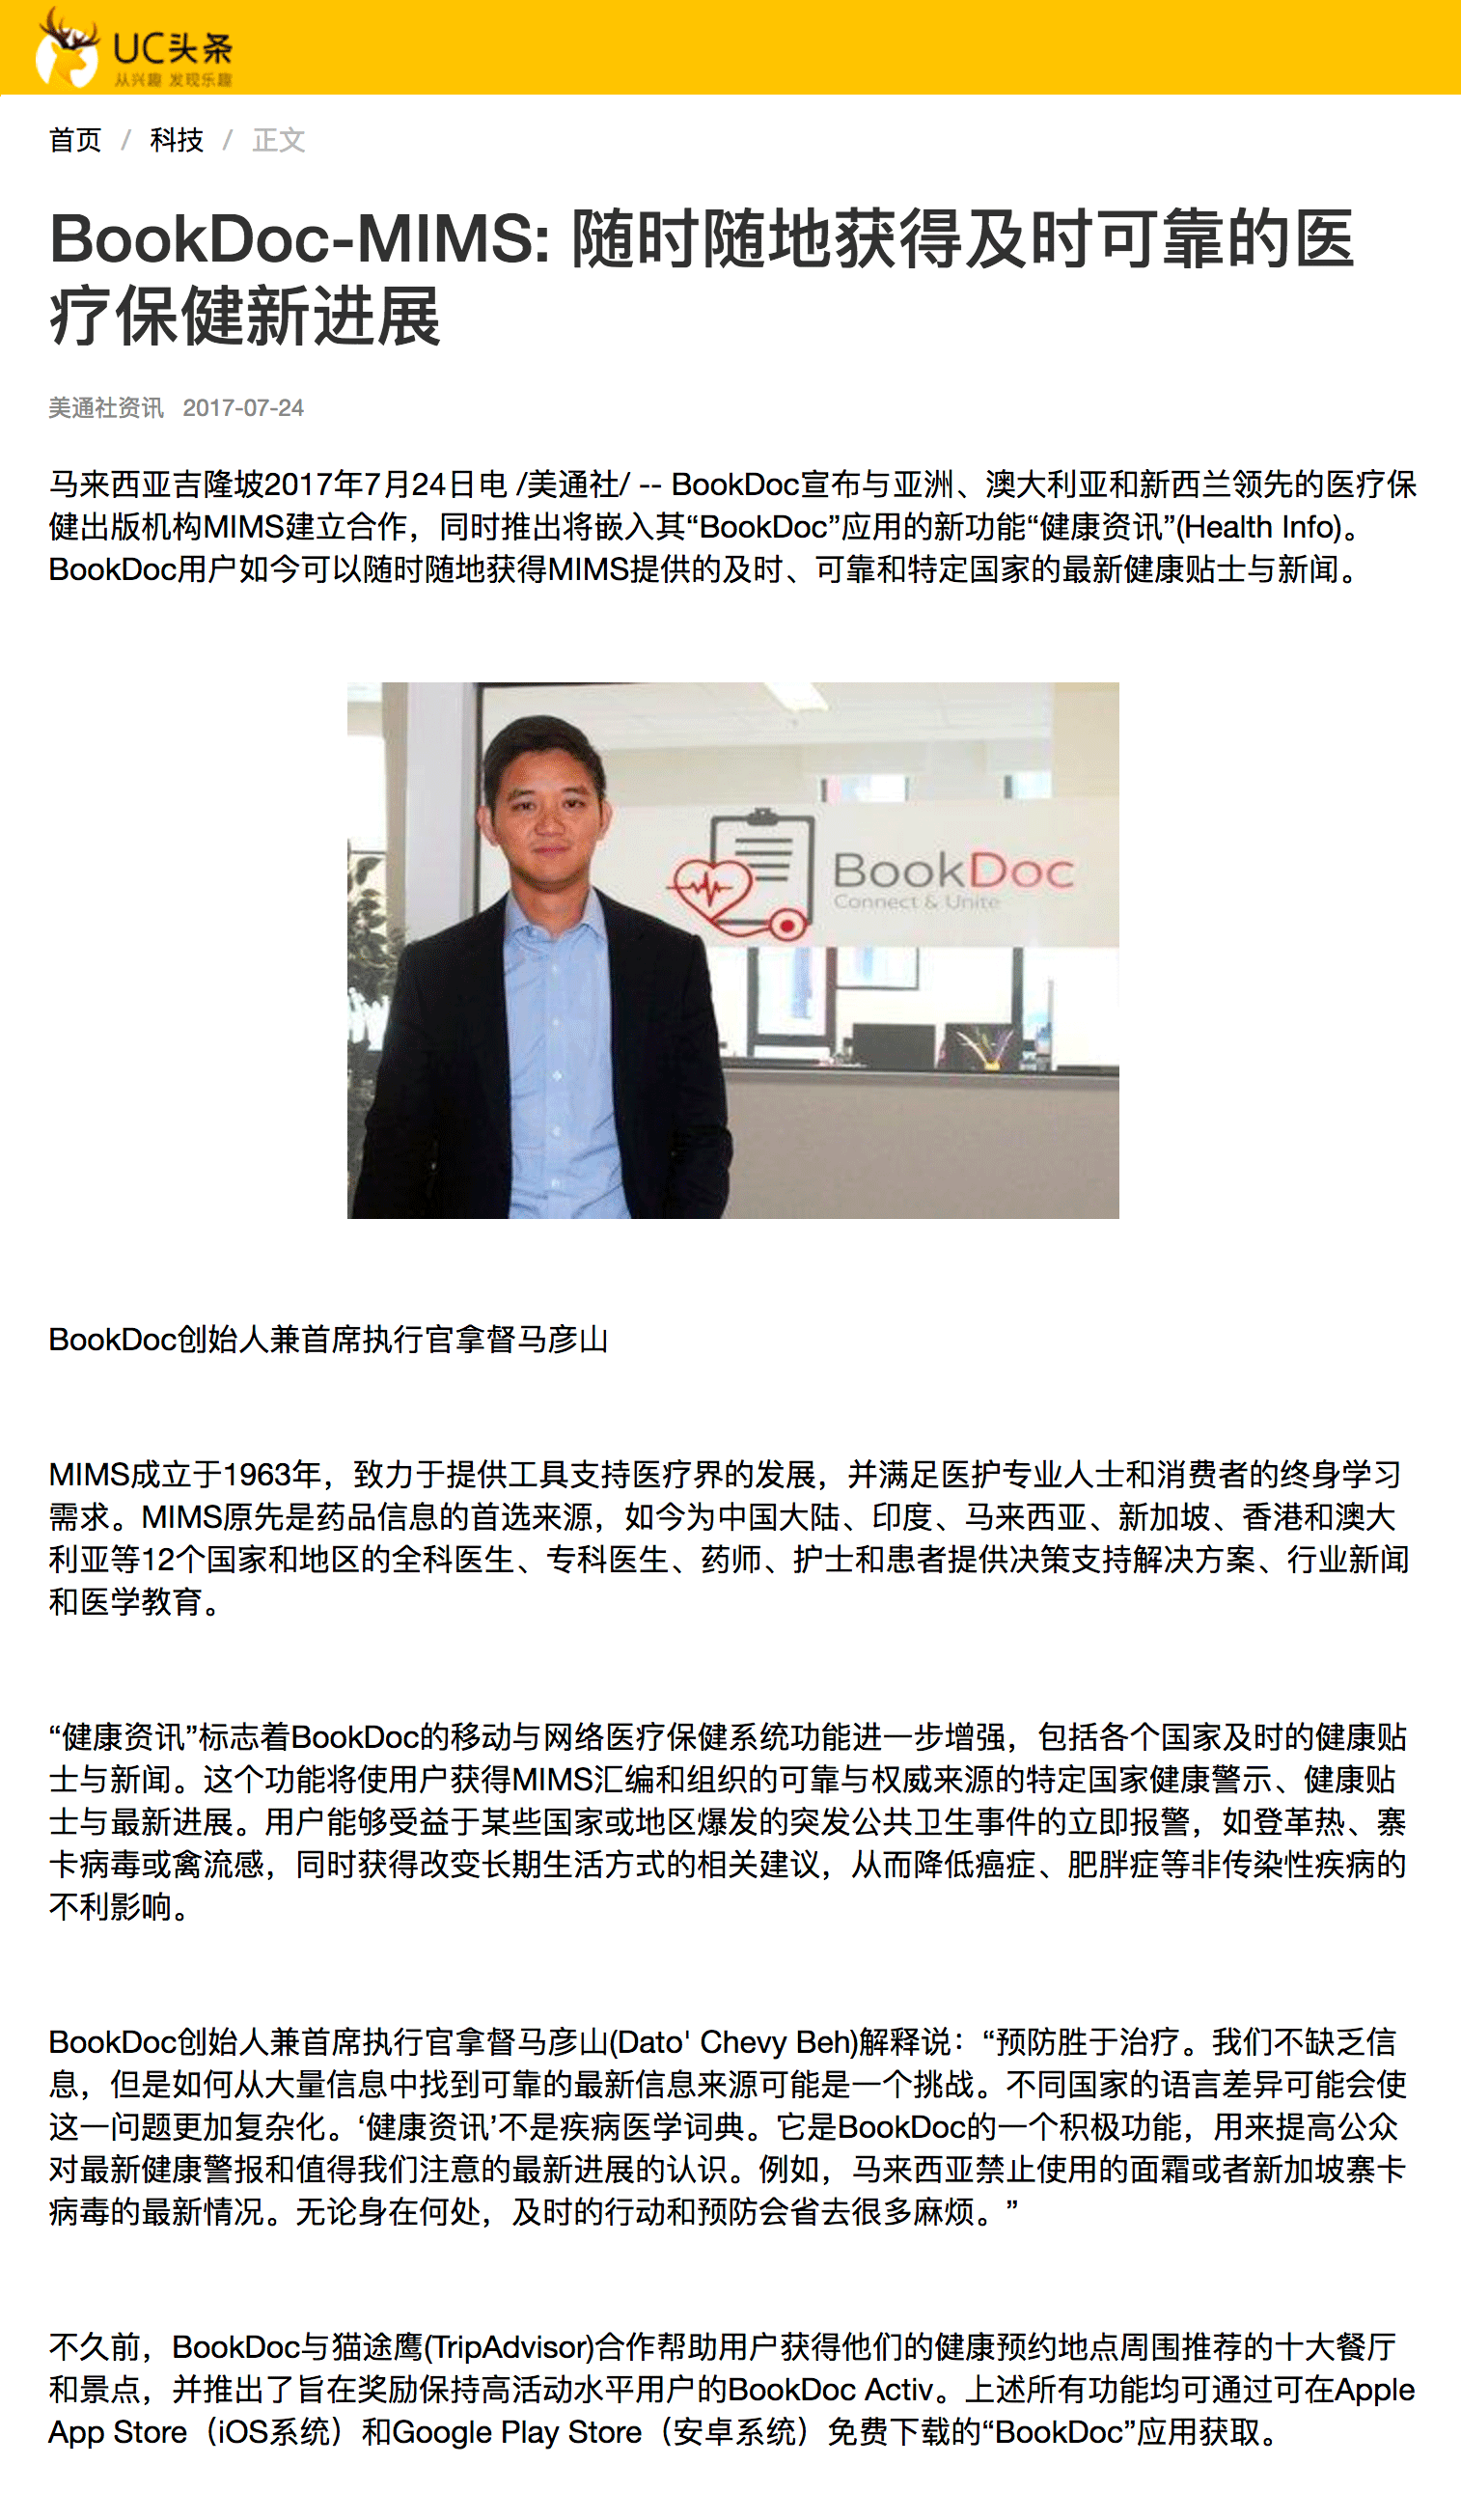 BookDoc featured on UC News of China